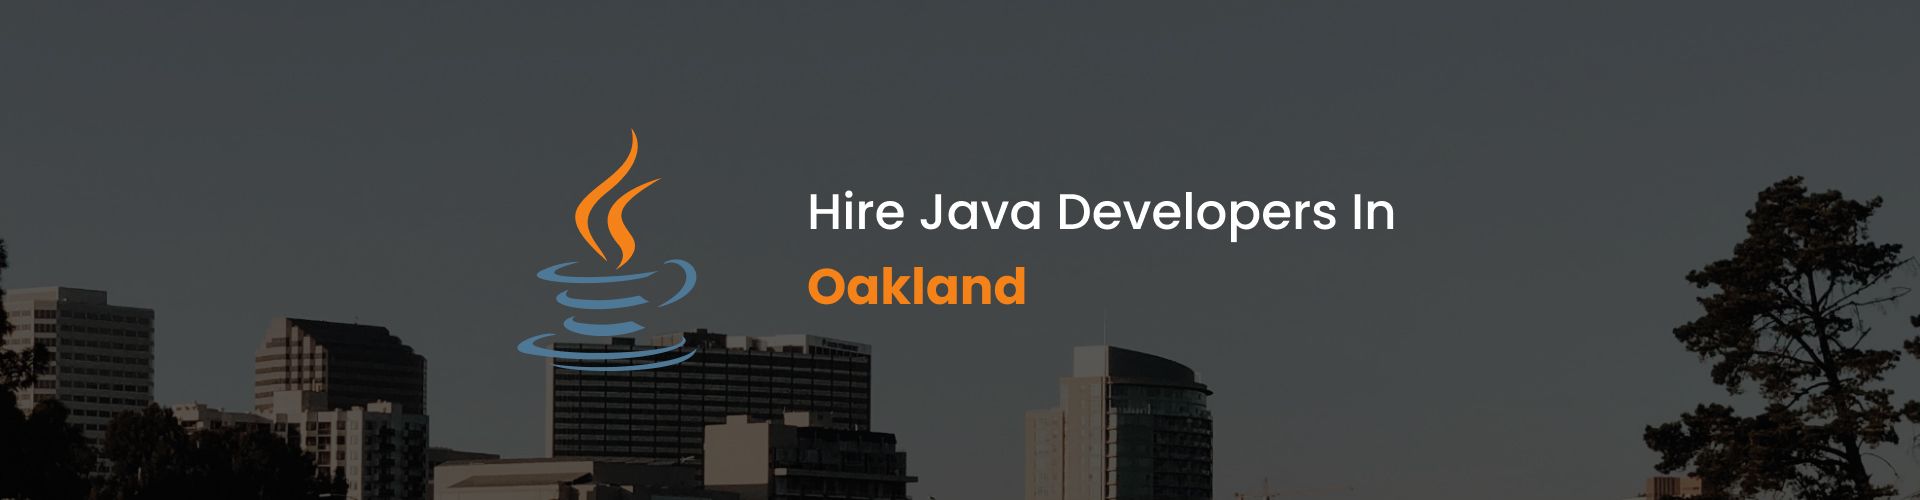 hire java developers in oakland